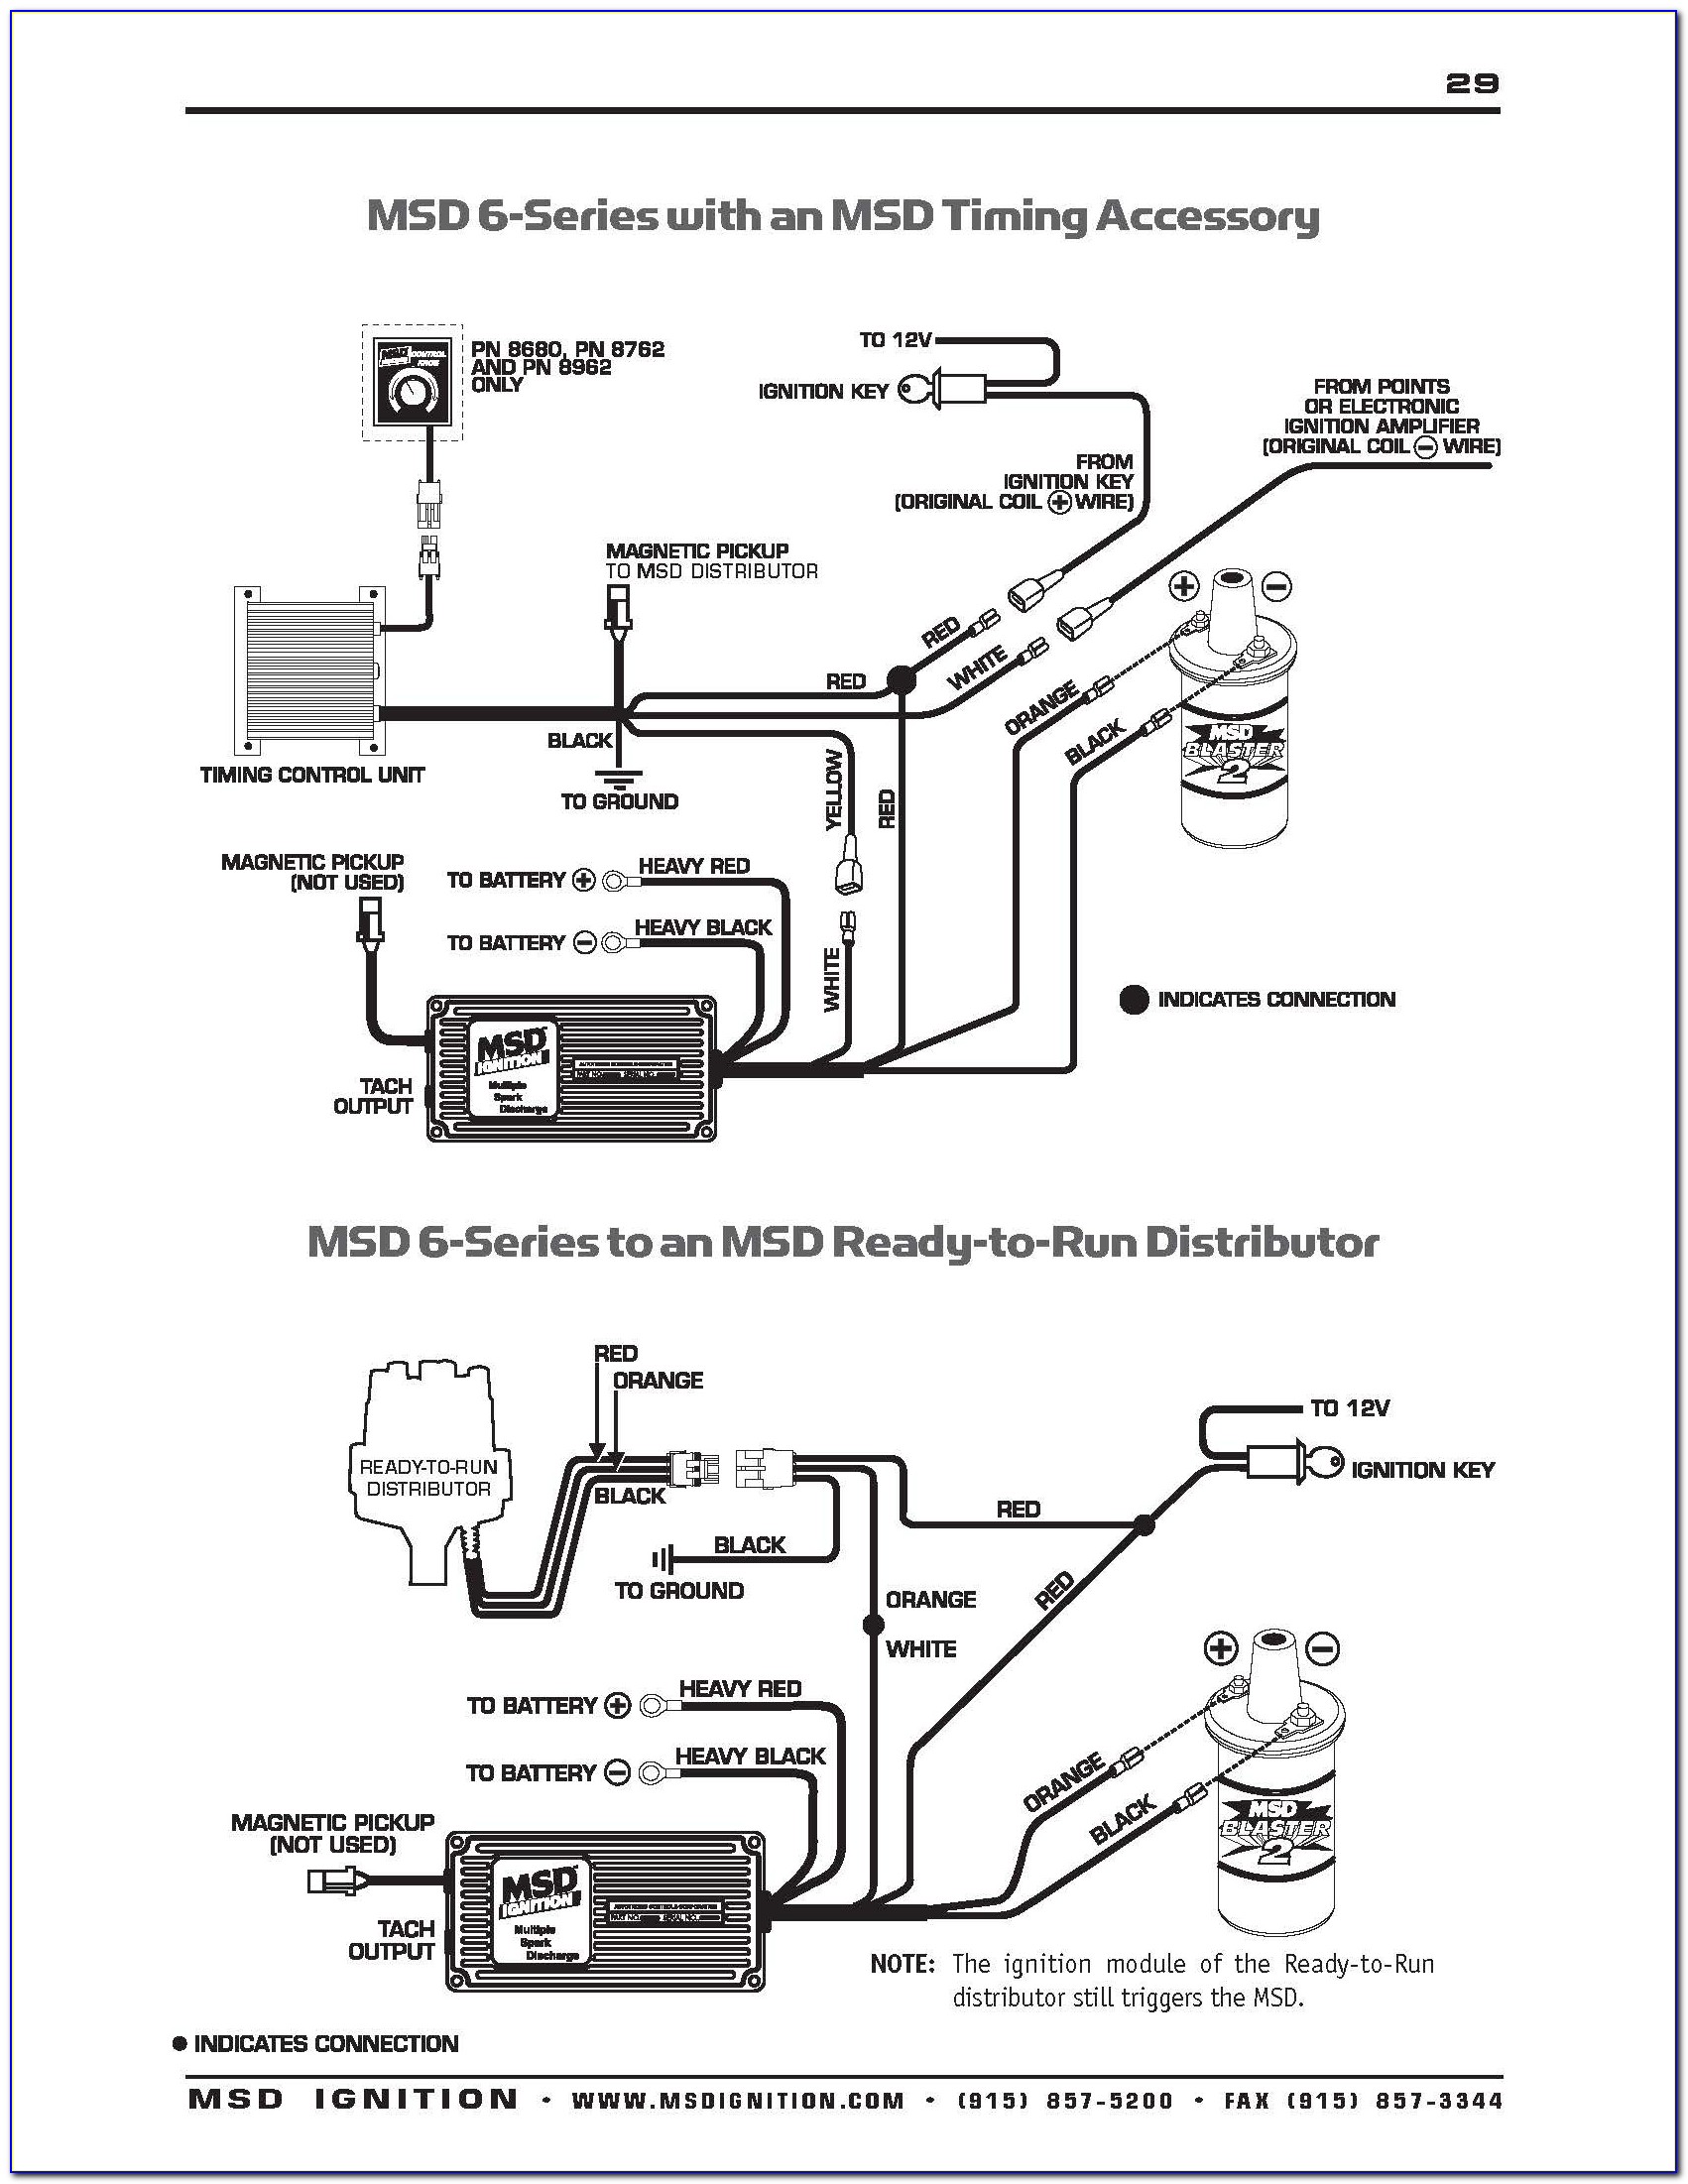 1988 Ford Ignition Module Wiring Diagram